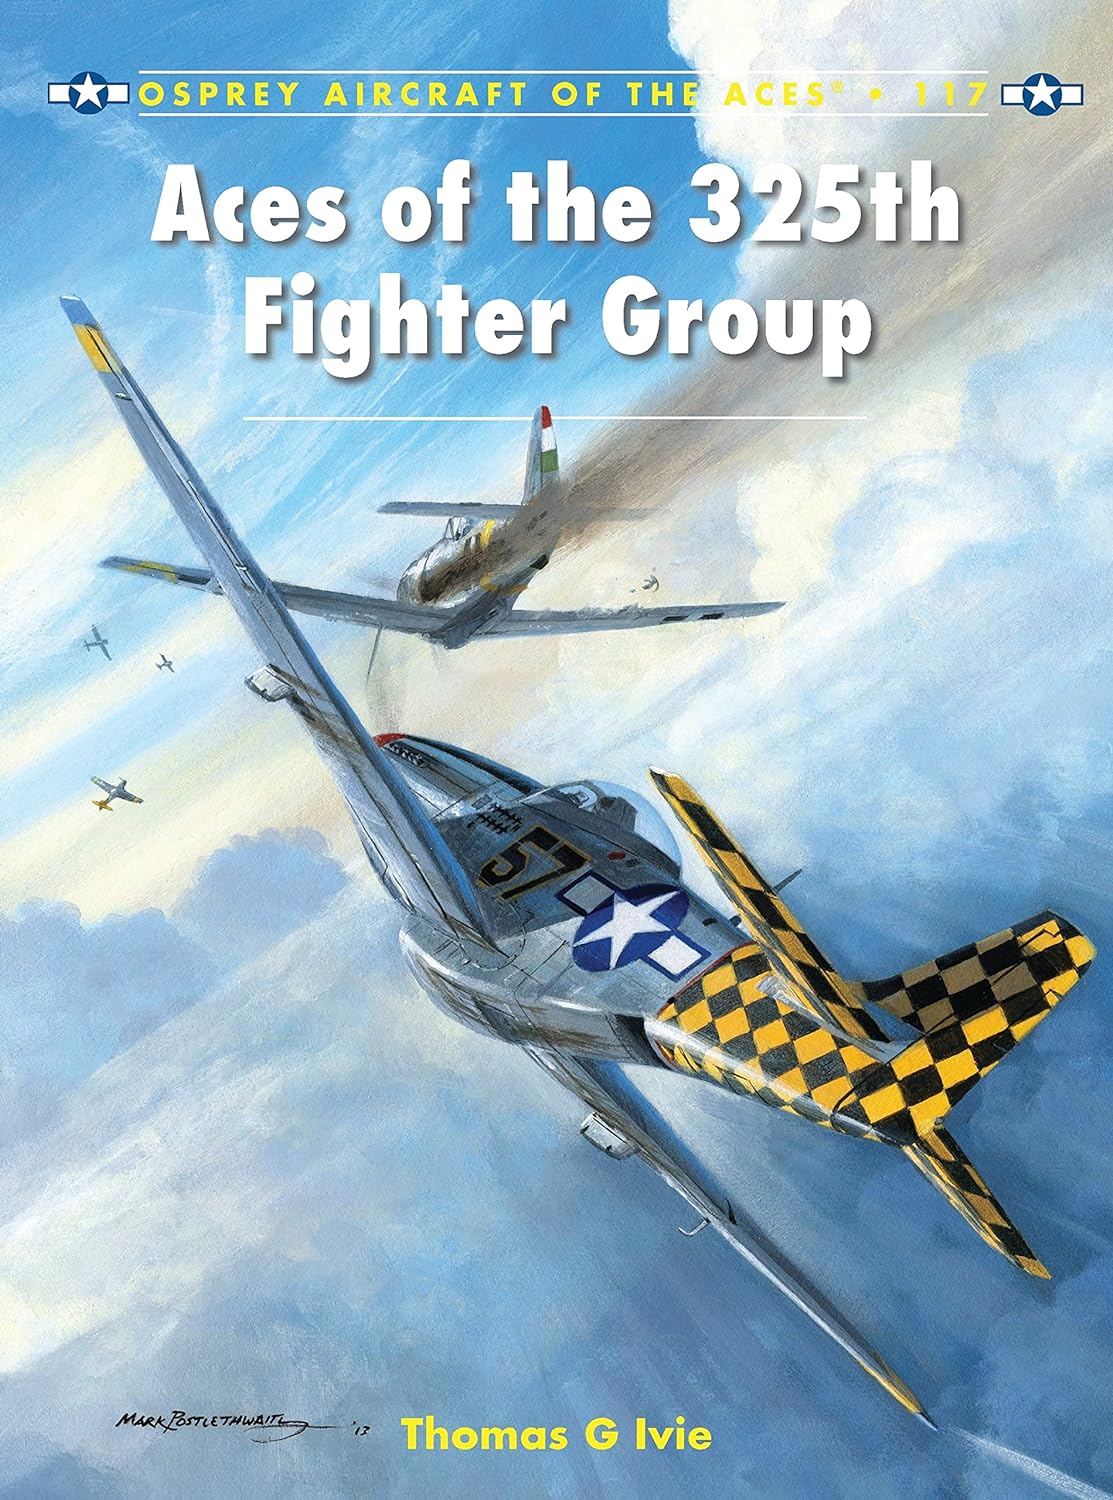 Aces of the 325th